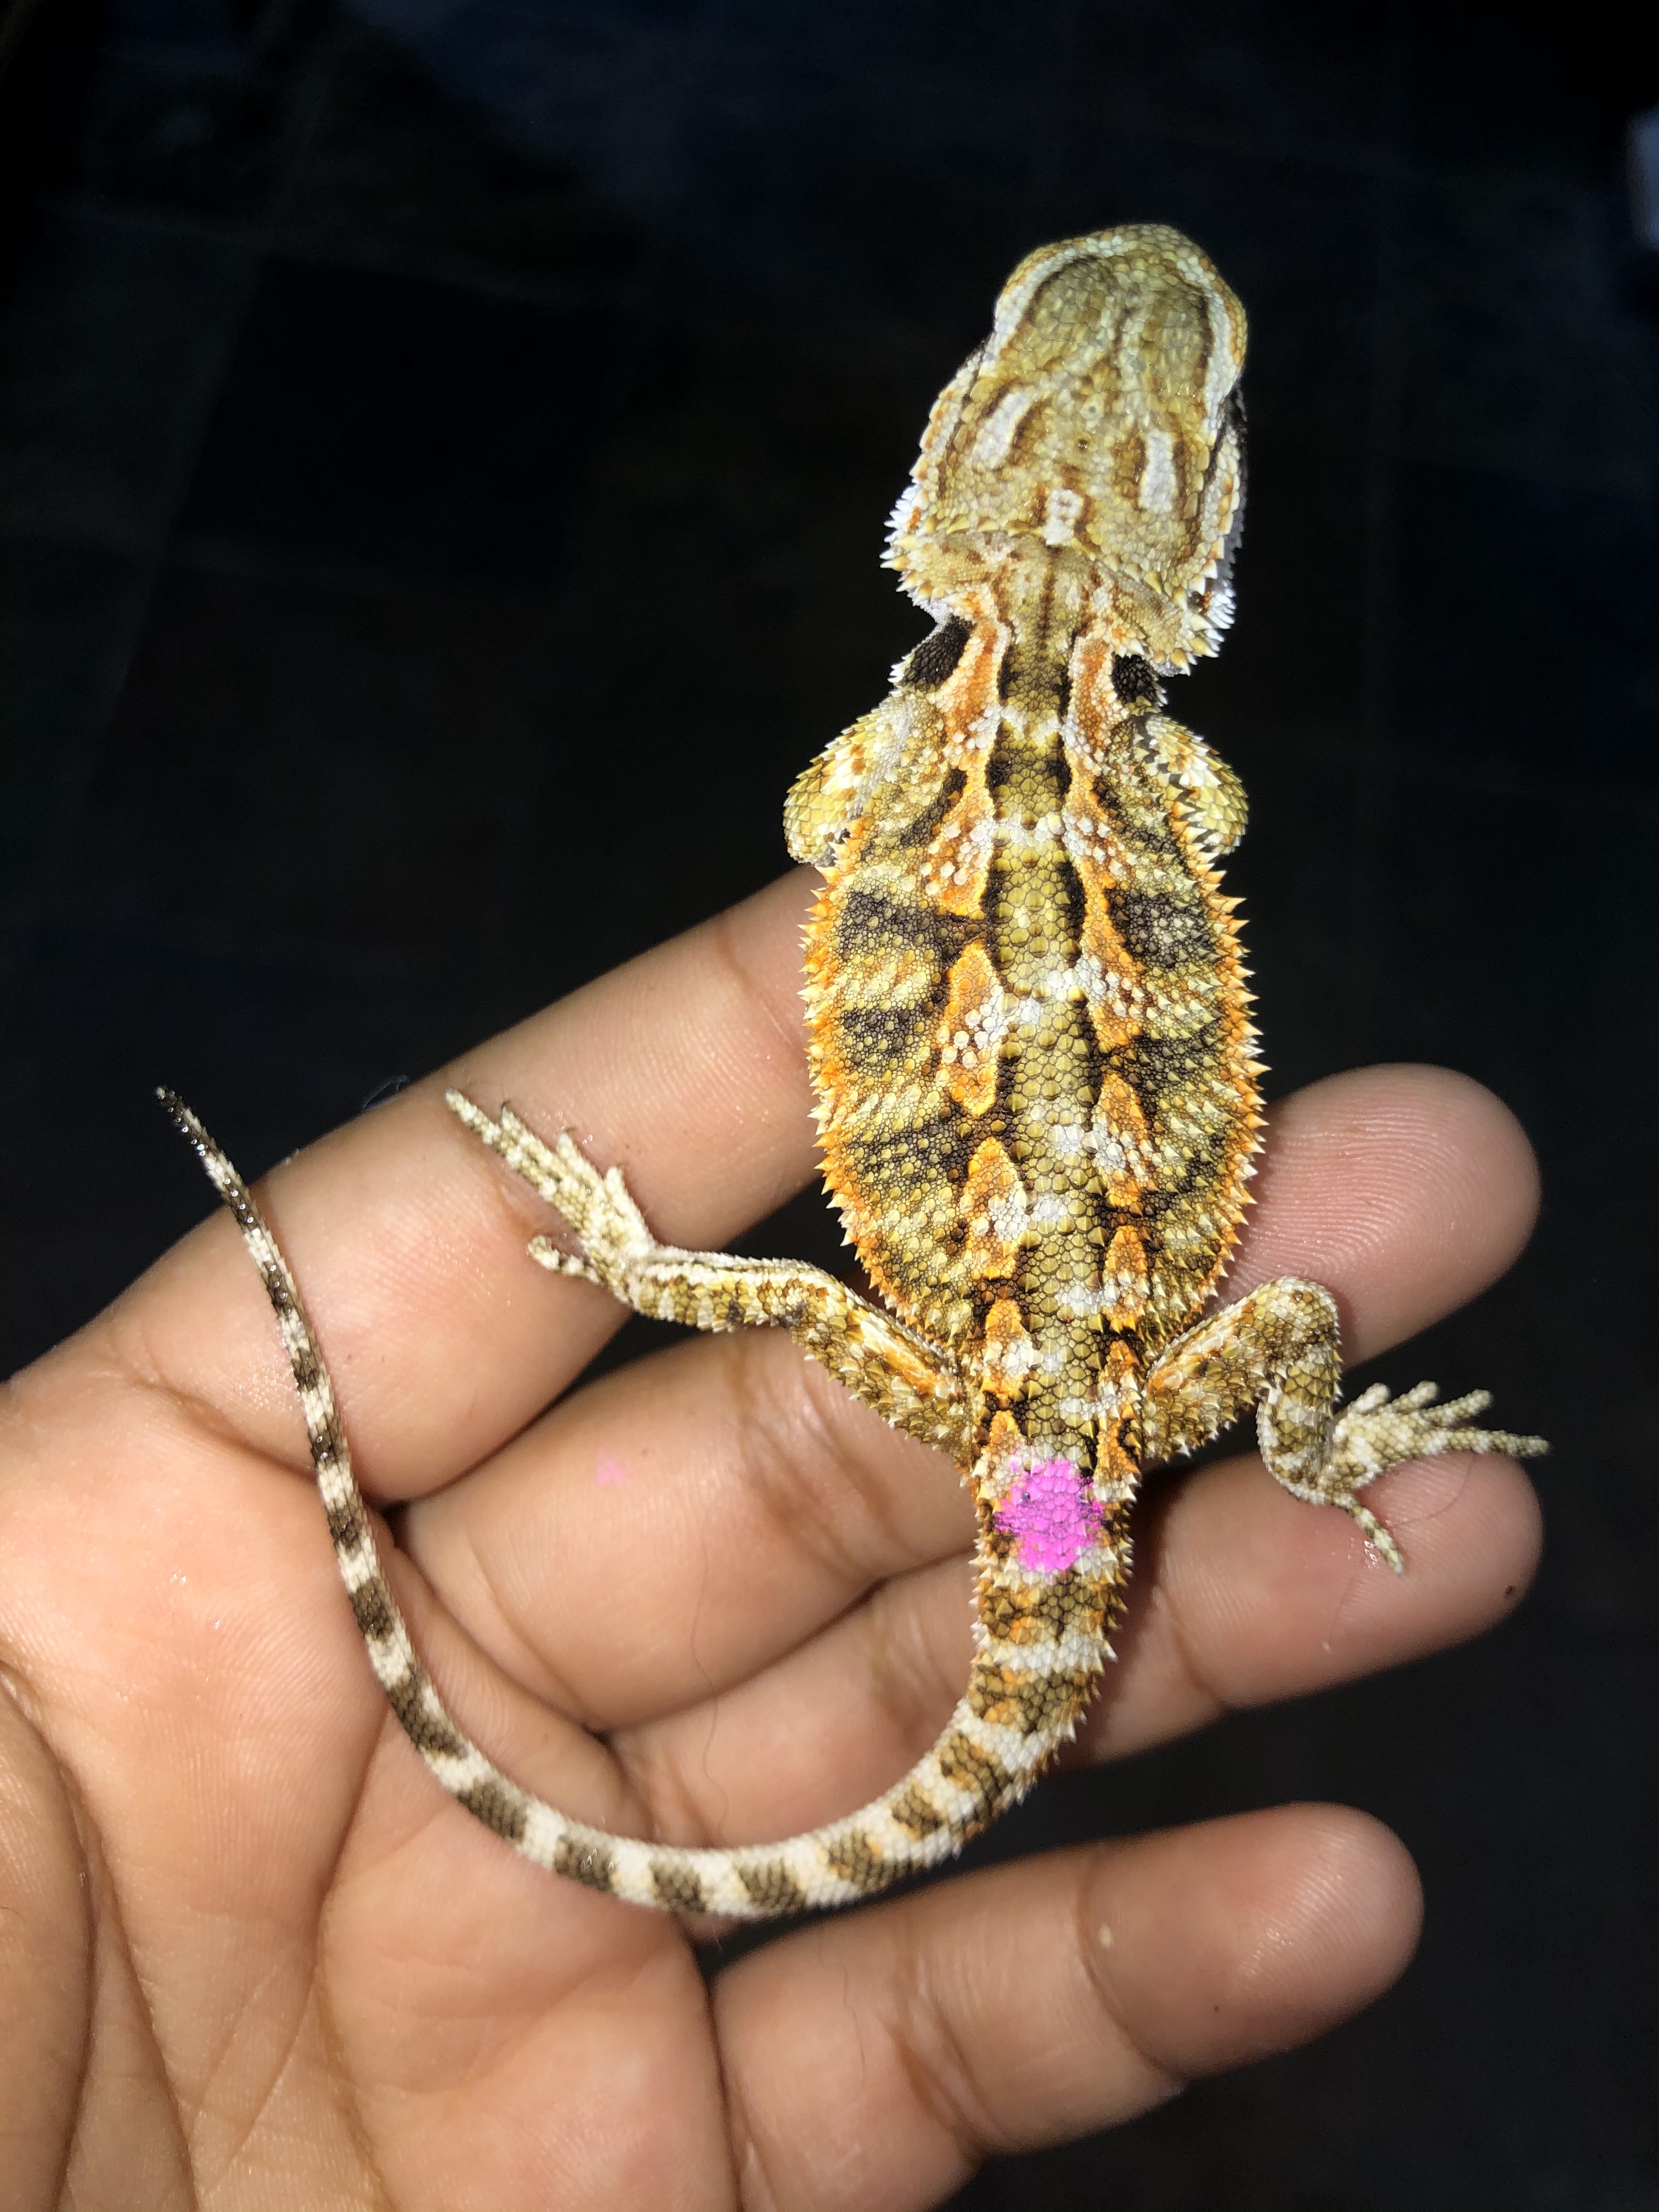 Normal Central Bearded Dragon by Killer Clutches